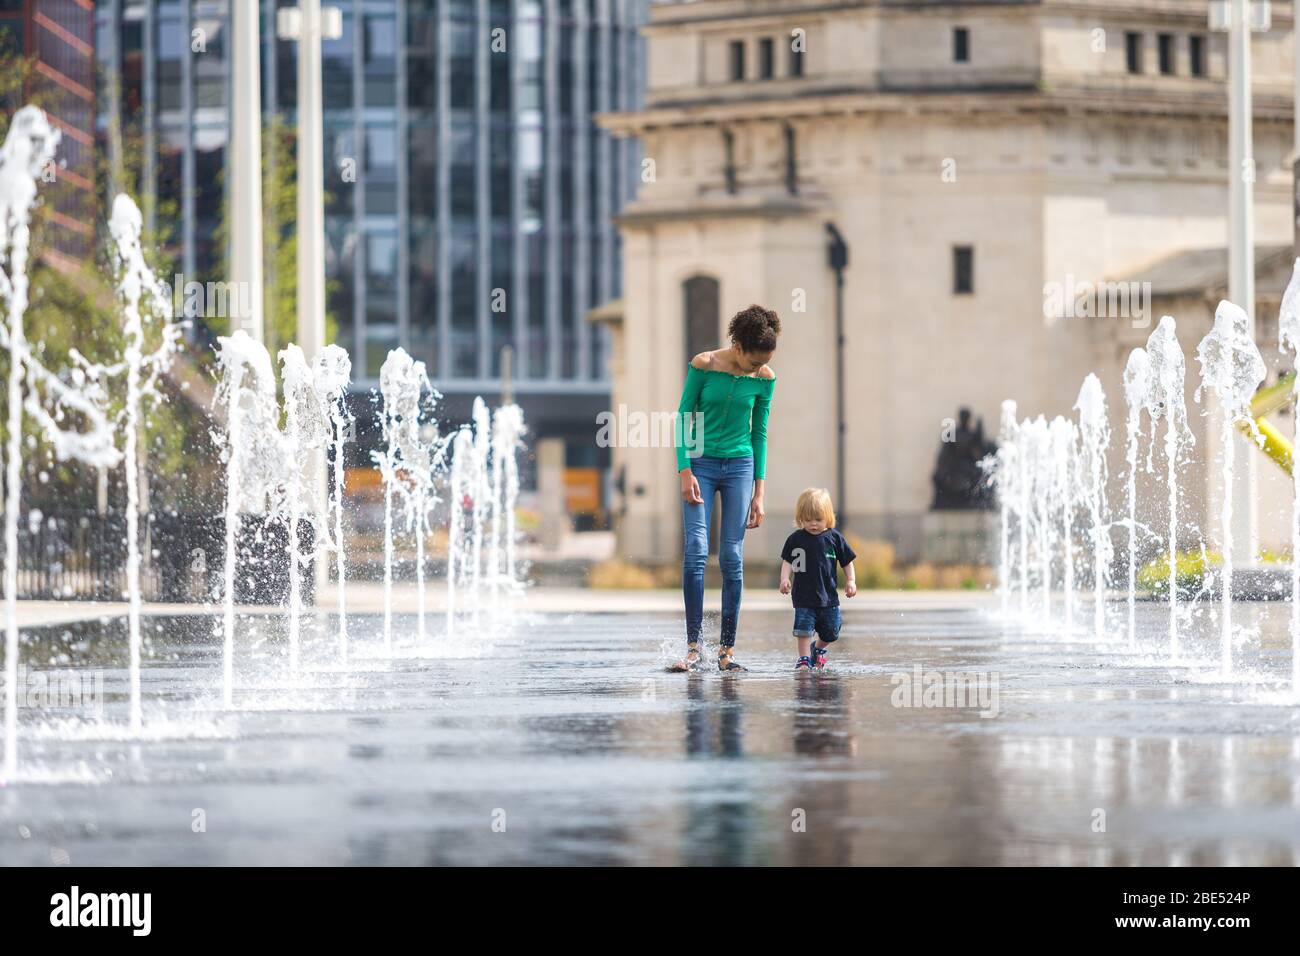 Birmingham, UK. 12th Apr, 2020. Twelve-year-old Mia takes her 18-month-old brother Jasper for their daily exercise walk through the fountains in Centenary Square, Birmingham city centre. Their family lives nearby. Easter Sunday has begun as a warm and sunny day. [Parental permission granted] Credit: Peter Lopeman/Alamy Live News Stock Photo